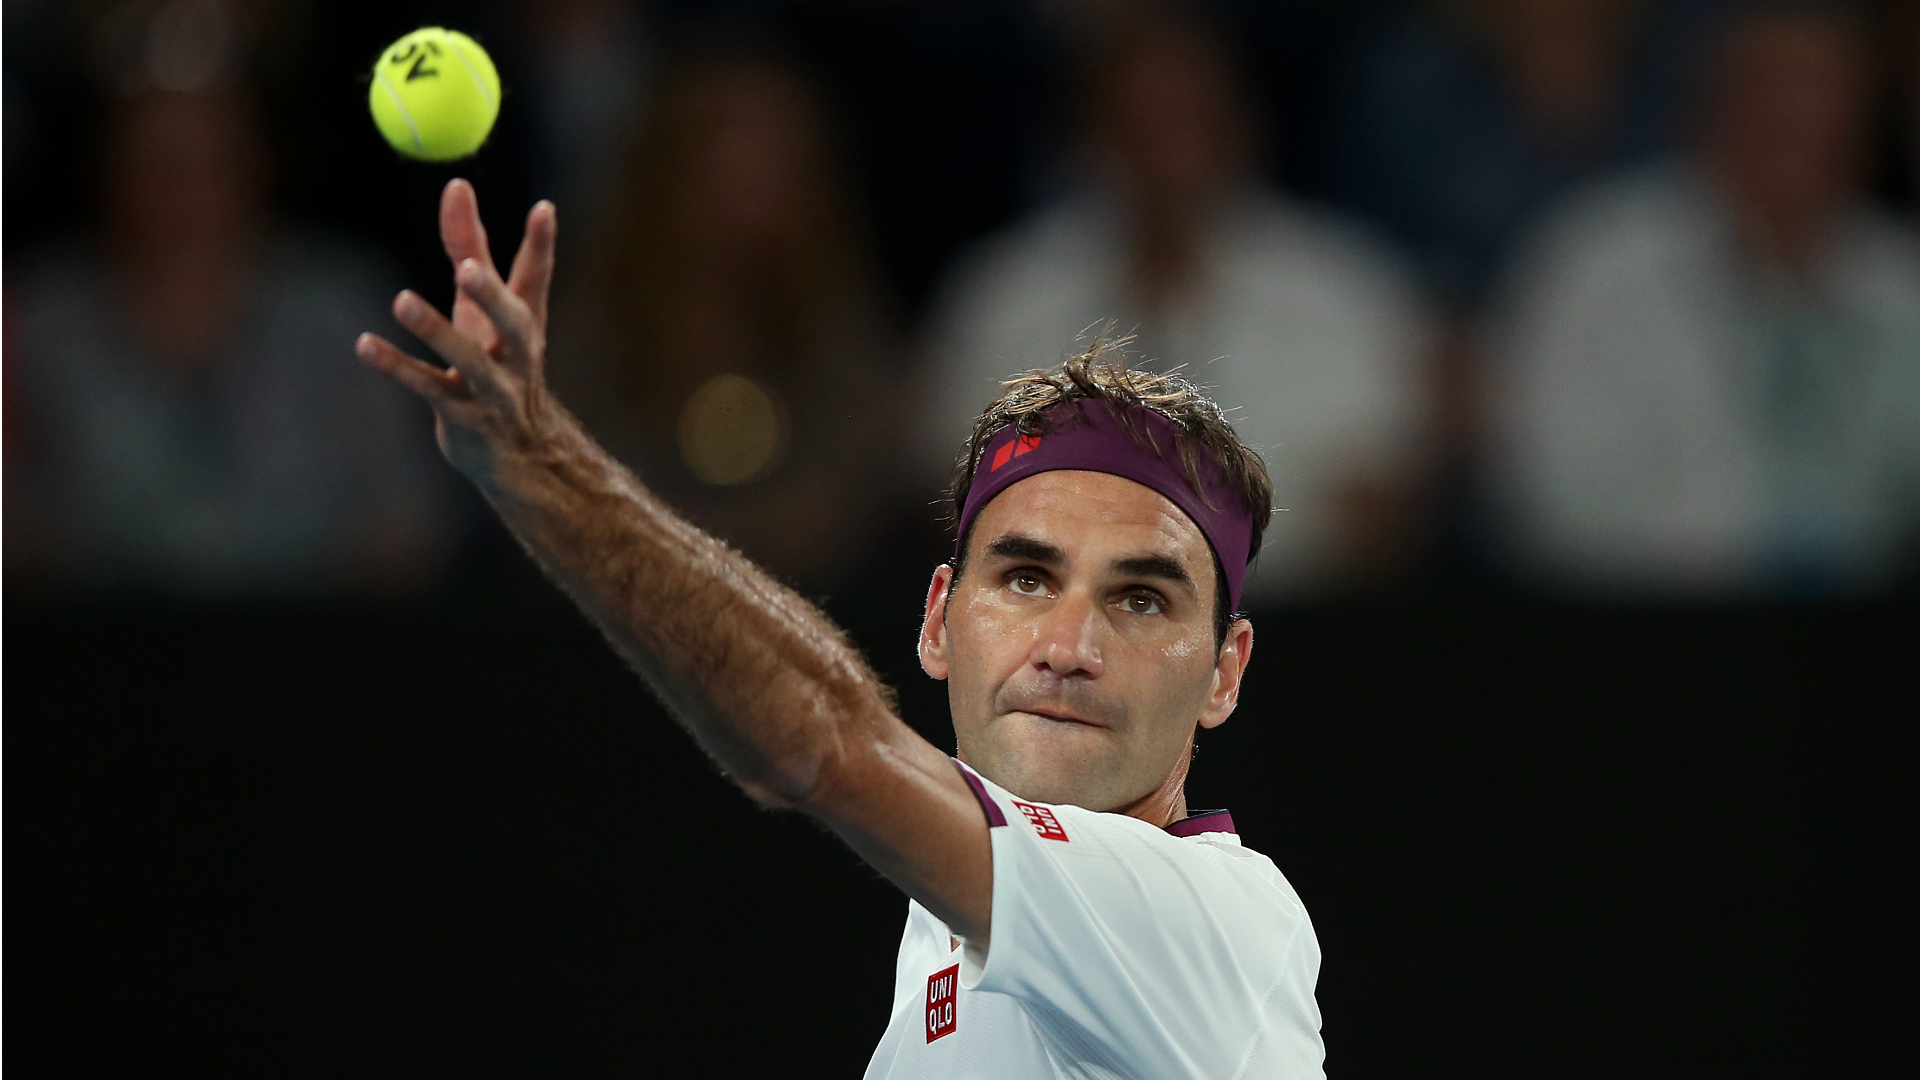 Roger Federer will take on American Tennys Sandgren for a place in the Australian Open semi-finals, and admits he senses a big threat.